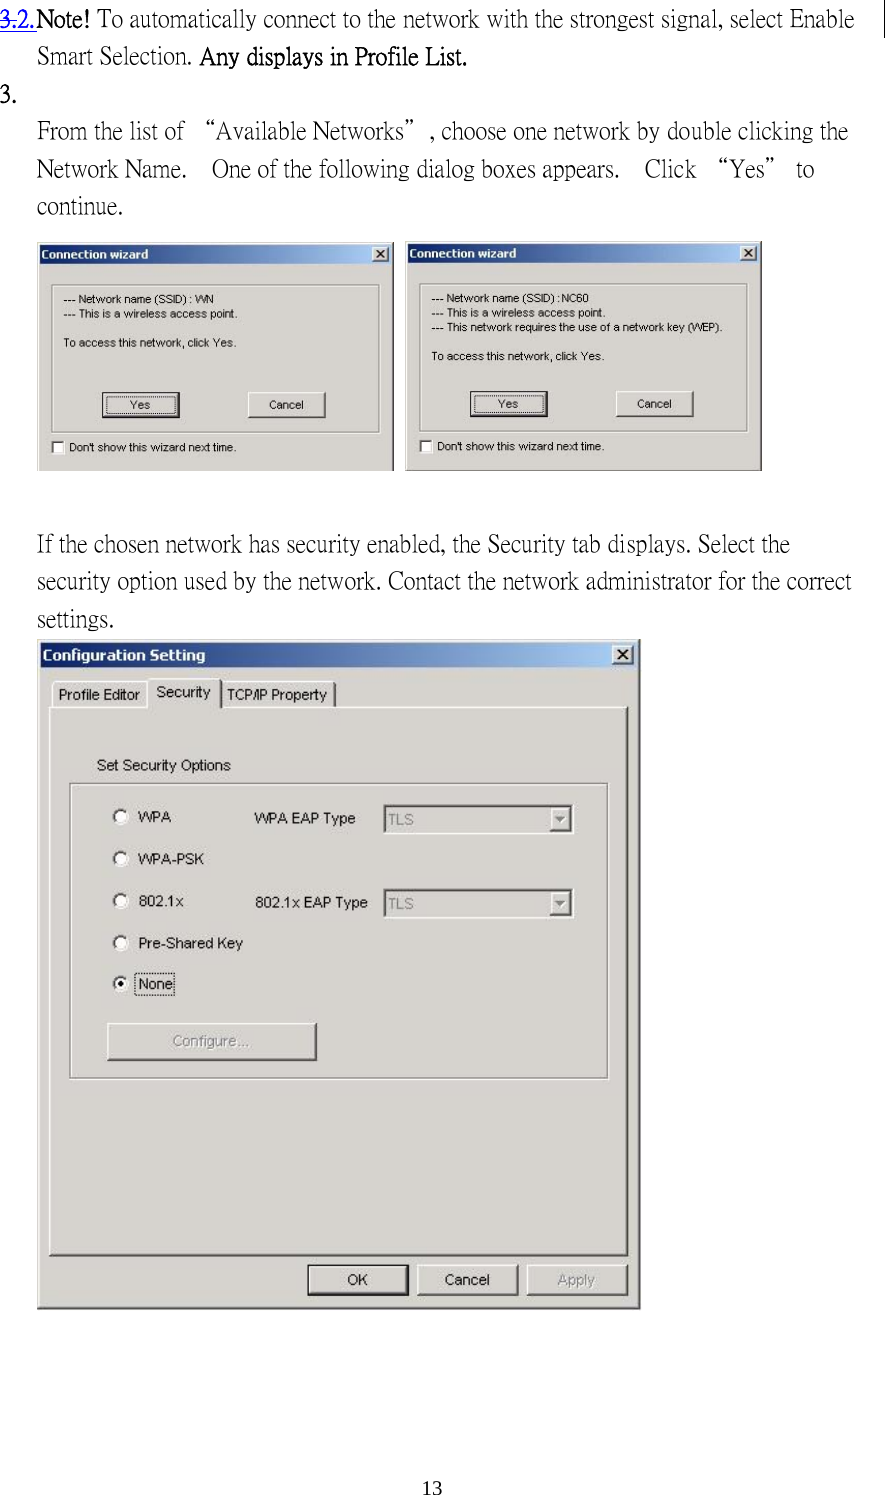  133.2. Note! To automatically connect to the network with the strongest signal, select Enable Smart Selection. Any displays in Profile List. 3.   From the list of “Available Networks＂, choose one network by double clicking the Network Name.    One of the following dialog boxes appears.    Click “Yes＂ to continue.     If the chosen network has security enabled, the Security tab displays. Select the security option used by the network. Contact the network administrator for the correct settings.     